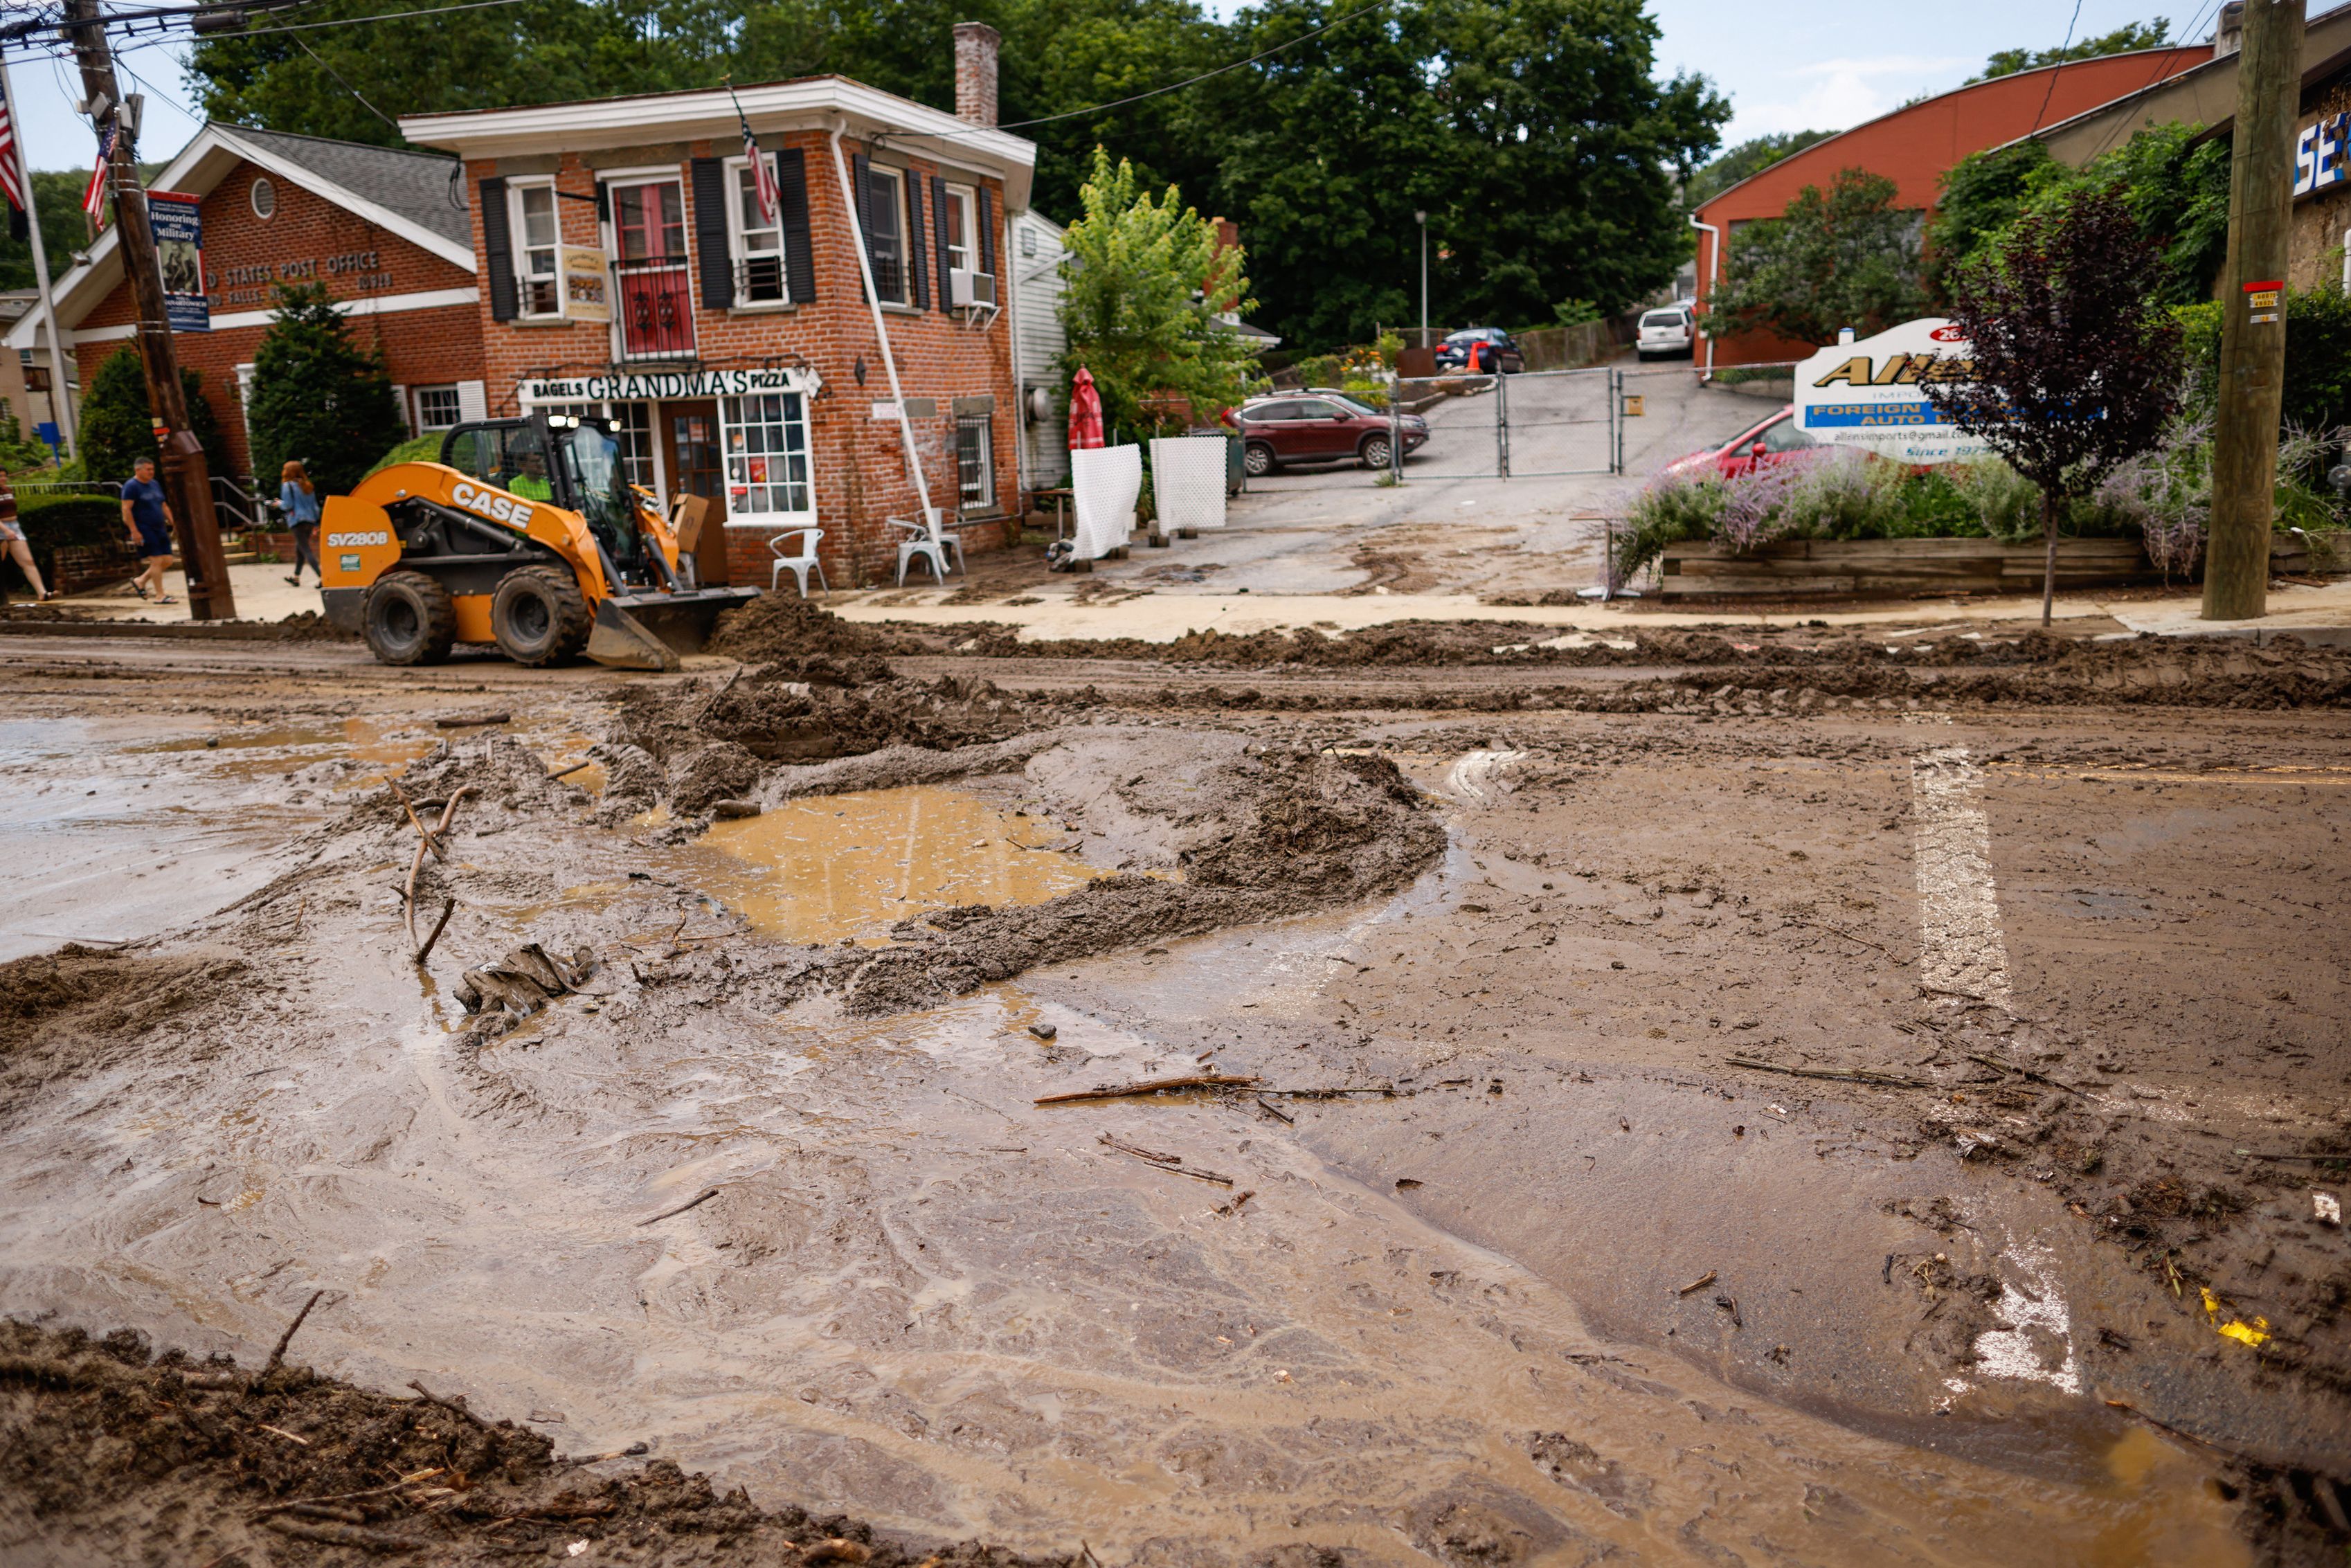 Workers remove mud from Main street after heavy rains in Highland Falls, New York, on July 10.